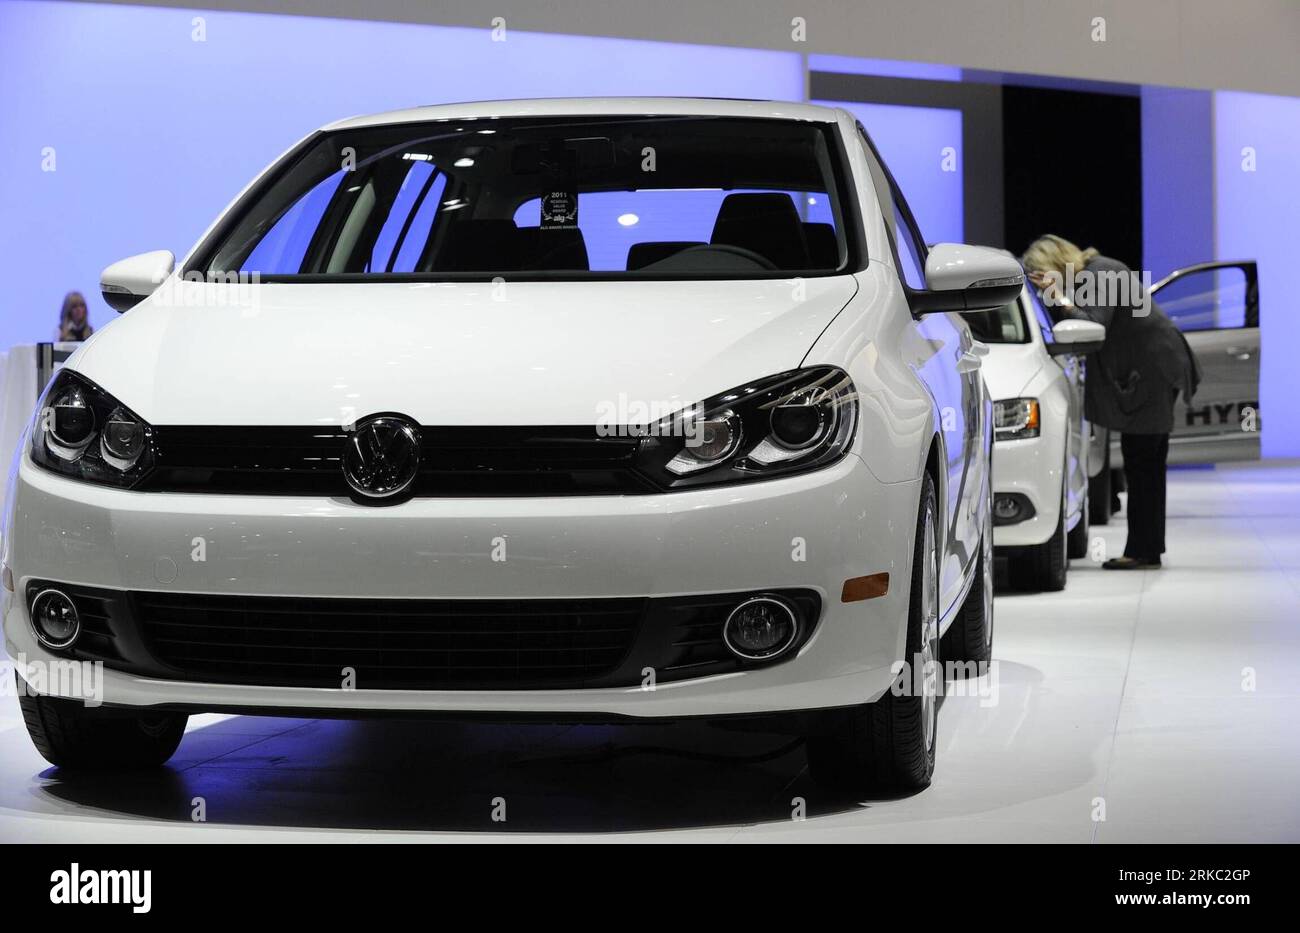 Bildnummer: 54651597  Datum: 17.11.2010  Copyright: imago/Xinhua (101118) -- LOS ANGELES, Nov. 18, 2010 (Xinhua) -- A Volkswagen rabbit is pictured during the press day of the LA auto show in Los Angeles, the United States, on Nov. 17, 2010. (Xinhua/Qi Heng) (nxl) US-LOS ANGELES-AUTO SHOW PUBLICATIONxNOTxINxCHN Wirtschaft Messe Automesse Motorshow Objekte PKW Auto kbdig xmk 2010 quer  o0 Autoindustrie, Freisteller    Bildnummer 54651597 Date 17 11 2010 Copyright Imago XINHUA  Los Angeles Nov 18 2010 XINHUA a Volkswagen Rabbit IS Pictured during The Press Day of The La Car Show in Los Angeles T Stock Photo